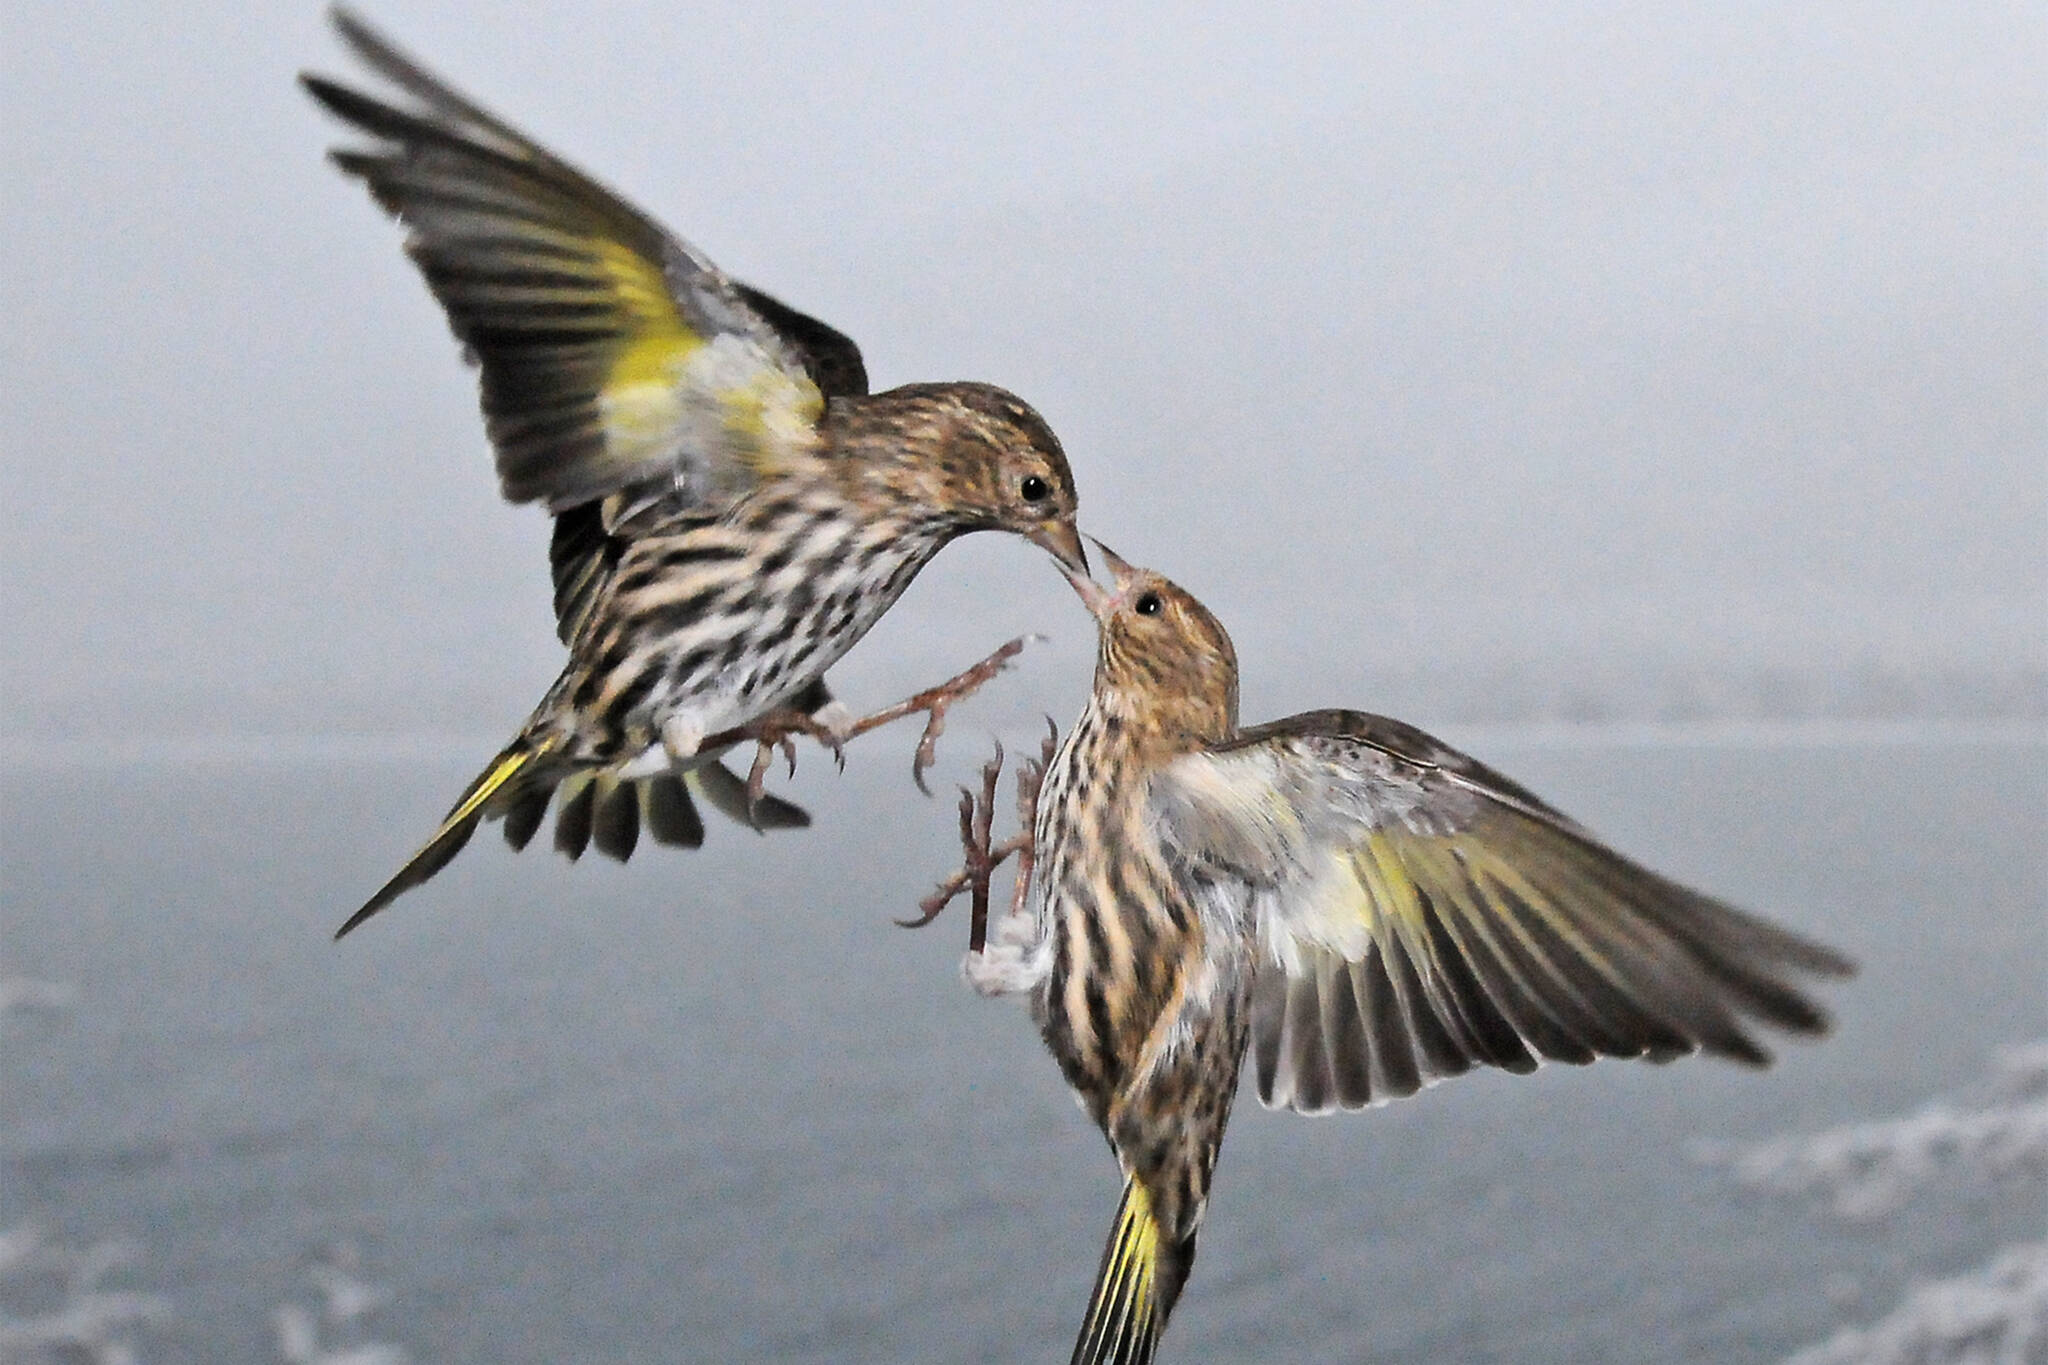 Pine siskins are feisty little birds, frequently aggressive against other birds and each other.(Courtesy Photo / Bob Armstrong)